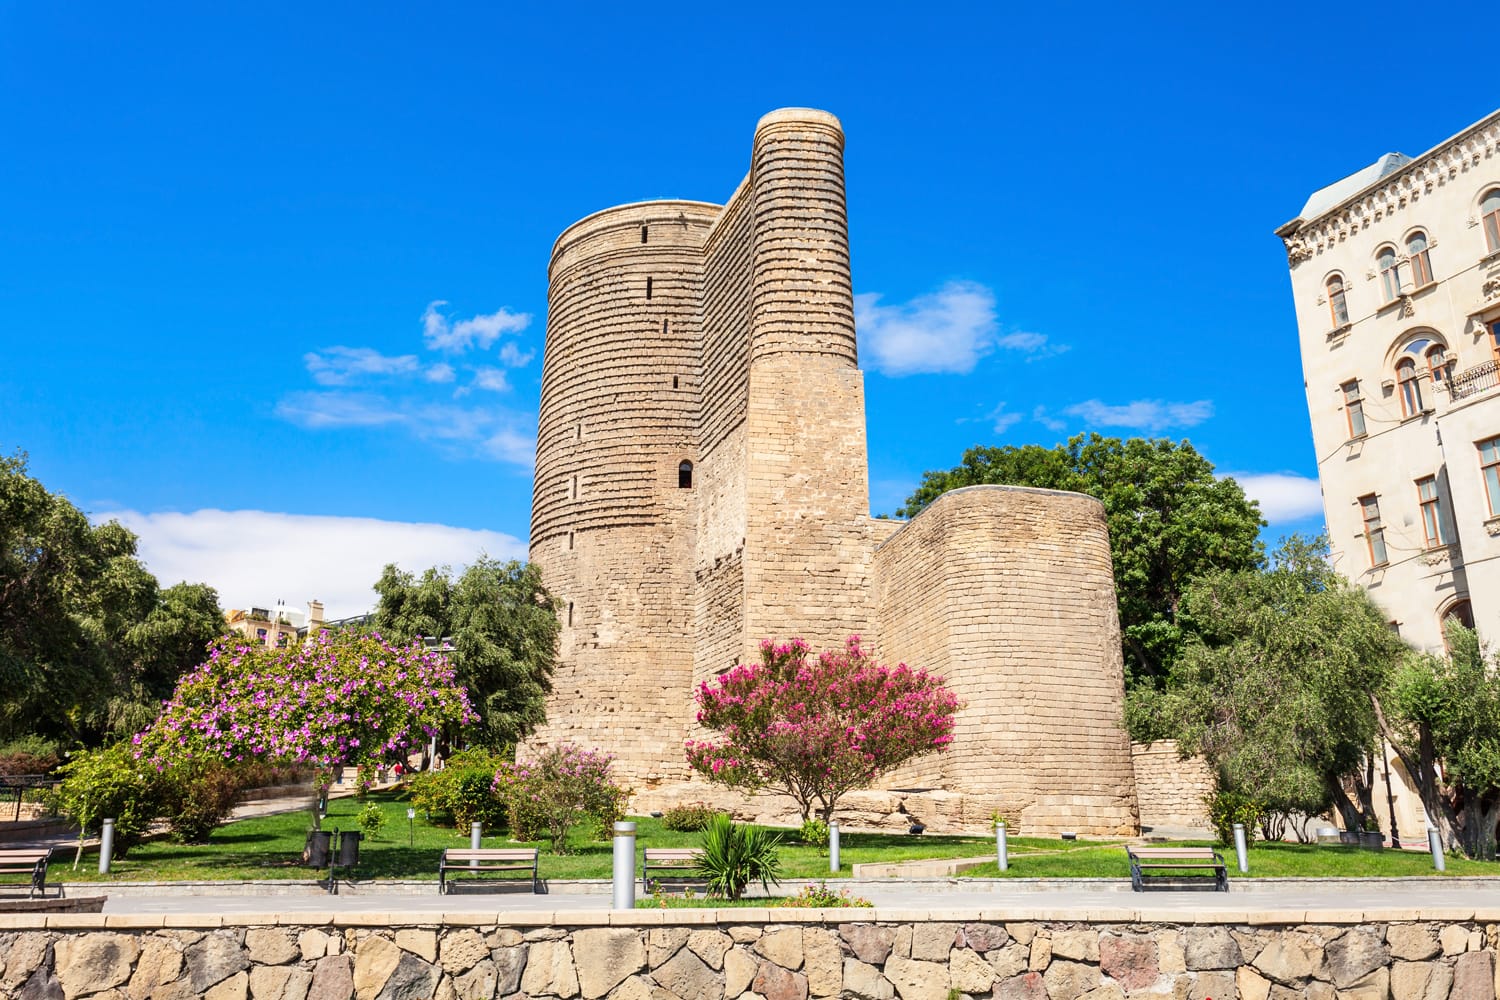 The Maiden Tower also known as Giz Galasi, located in the Old City in Baku, Azerbaijan. Maiden Tower was built in the 12th century as part of the walled city.